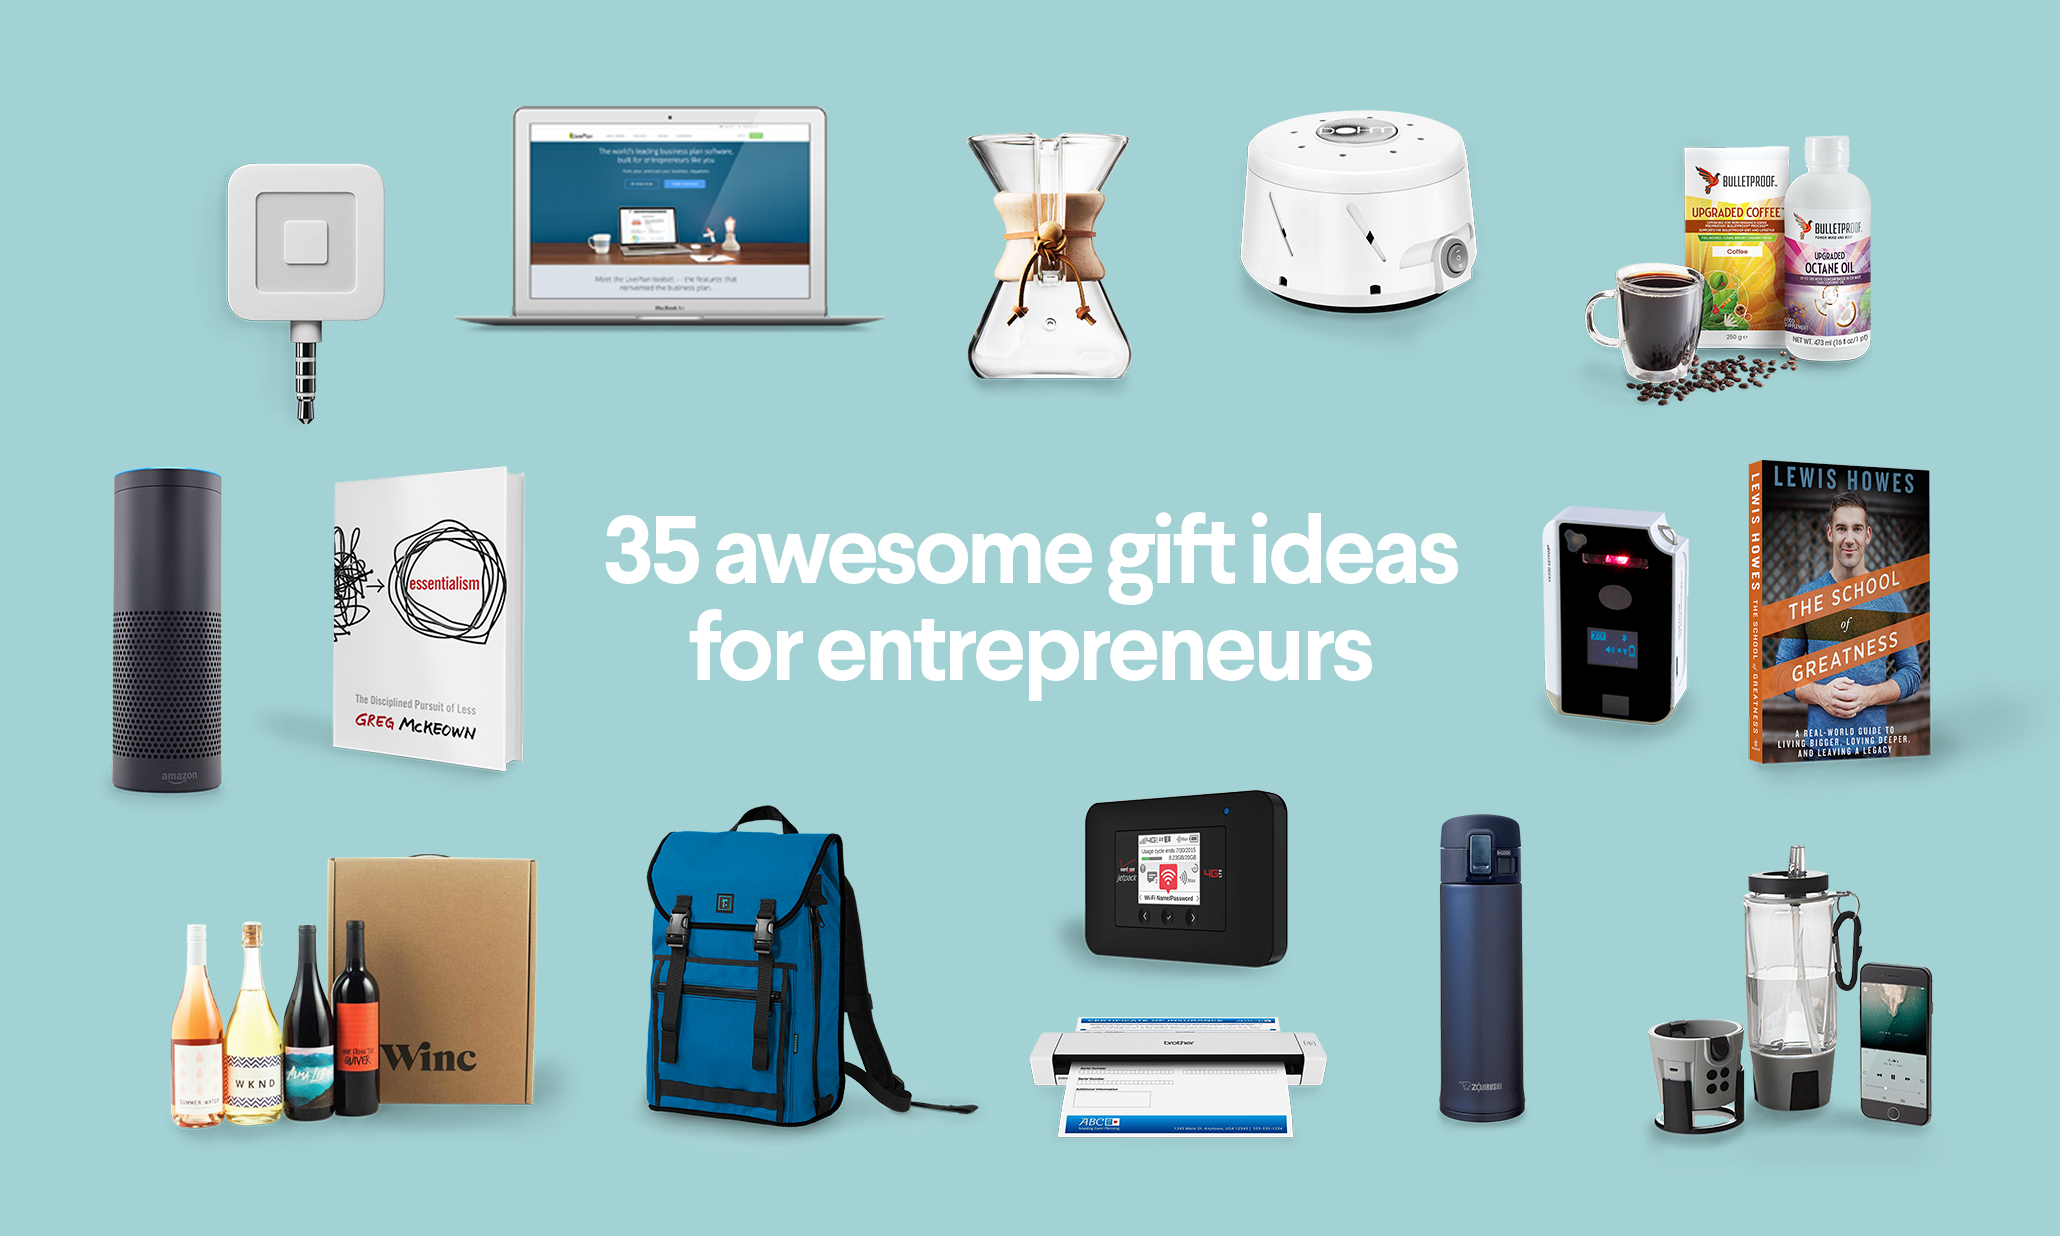 Share more than 79 gifts for guide leaders super hot